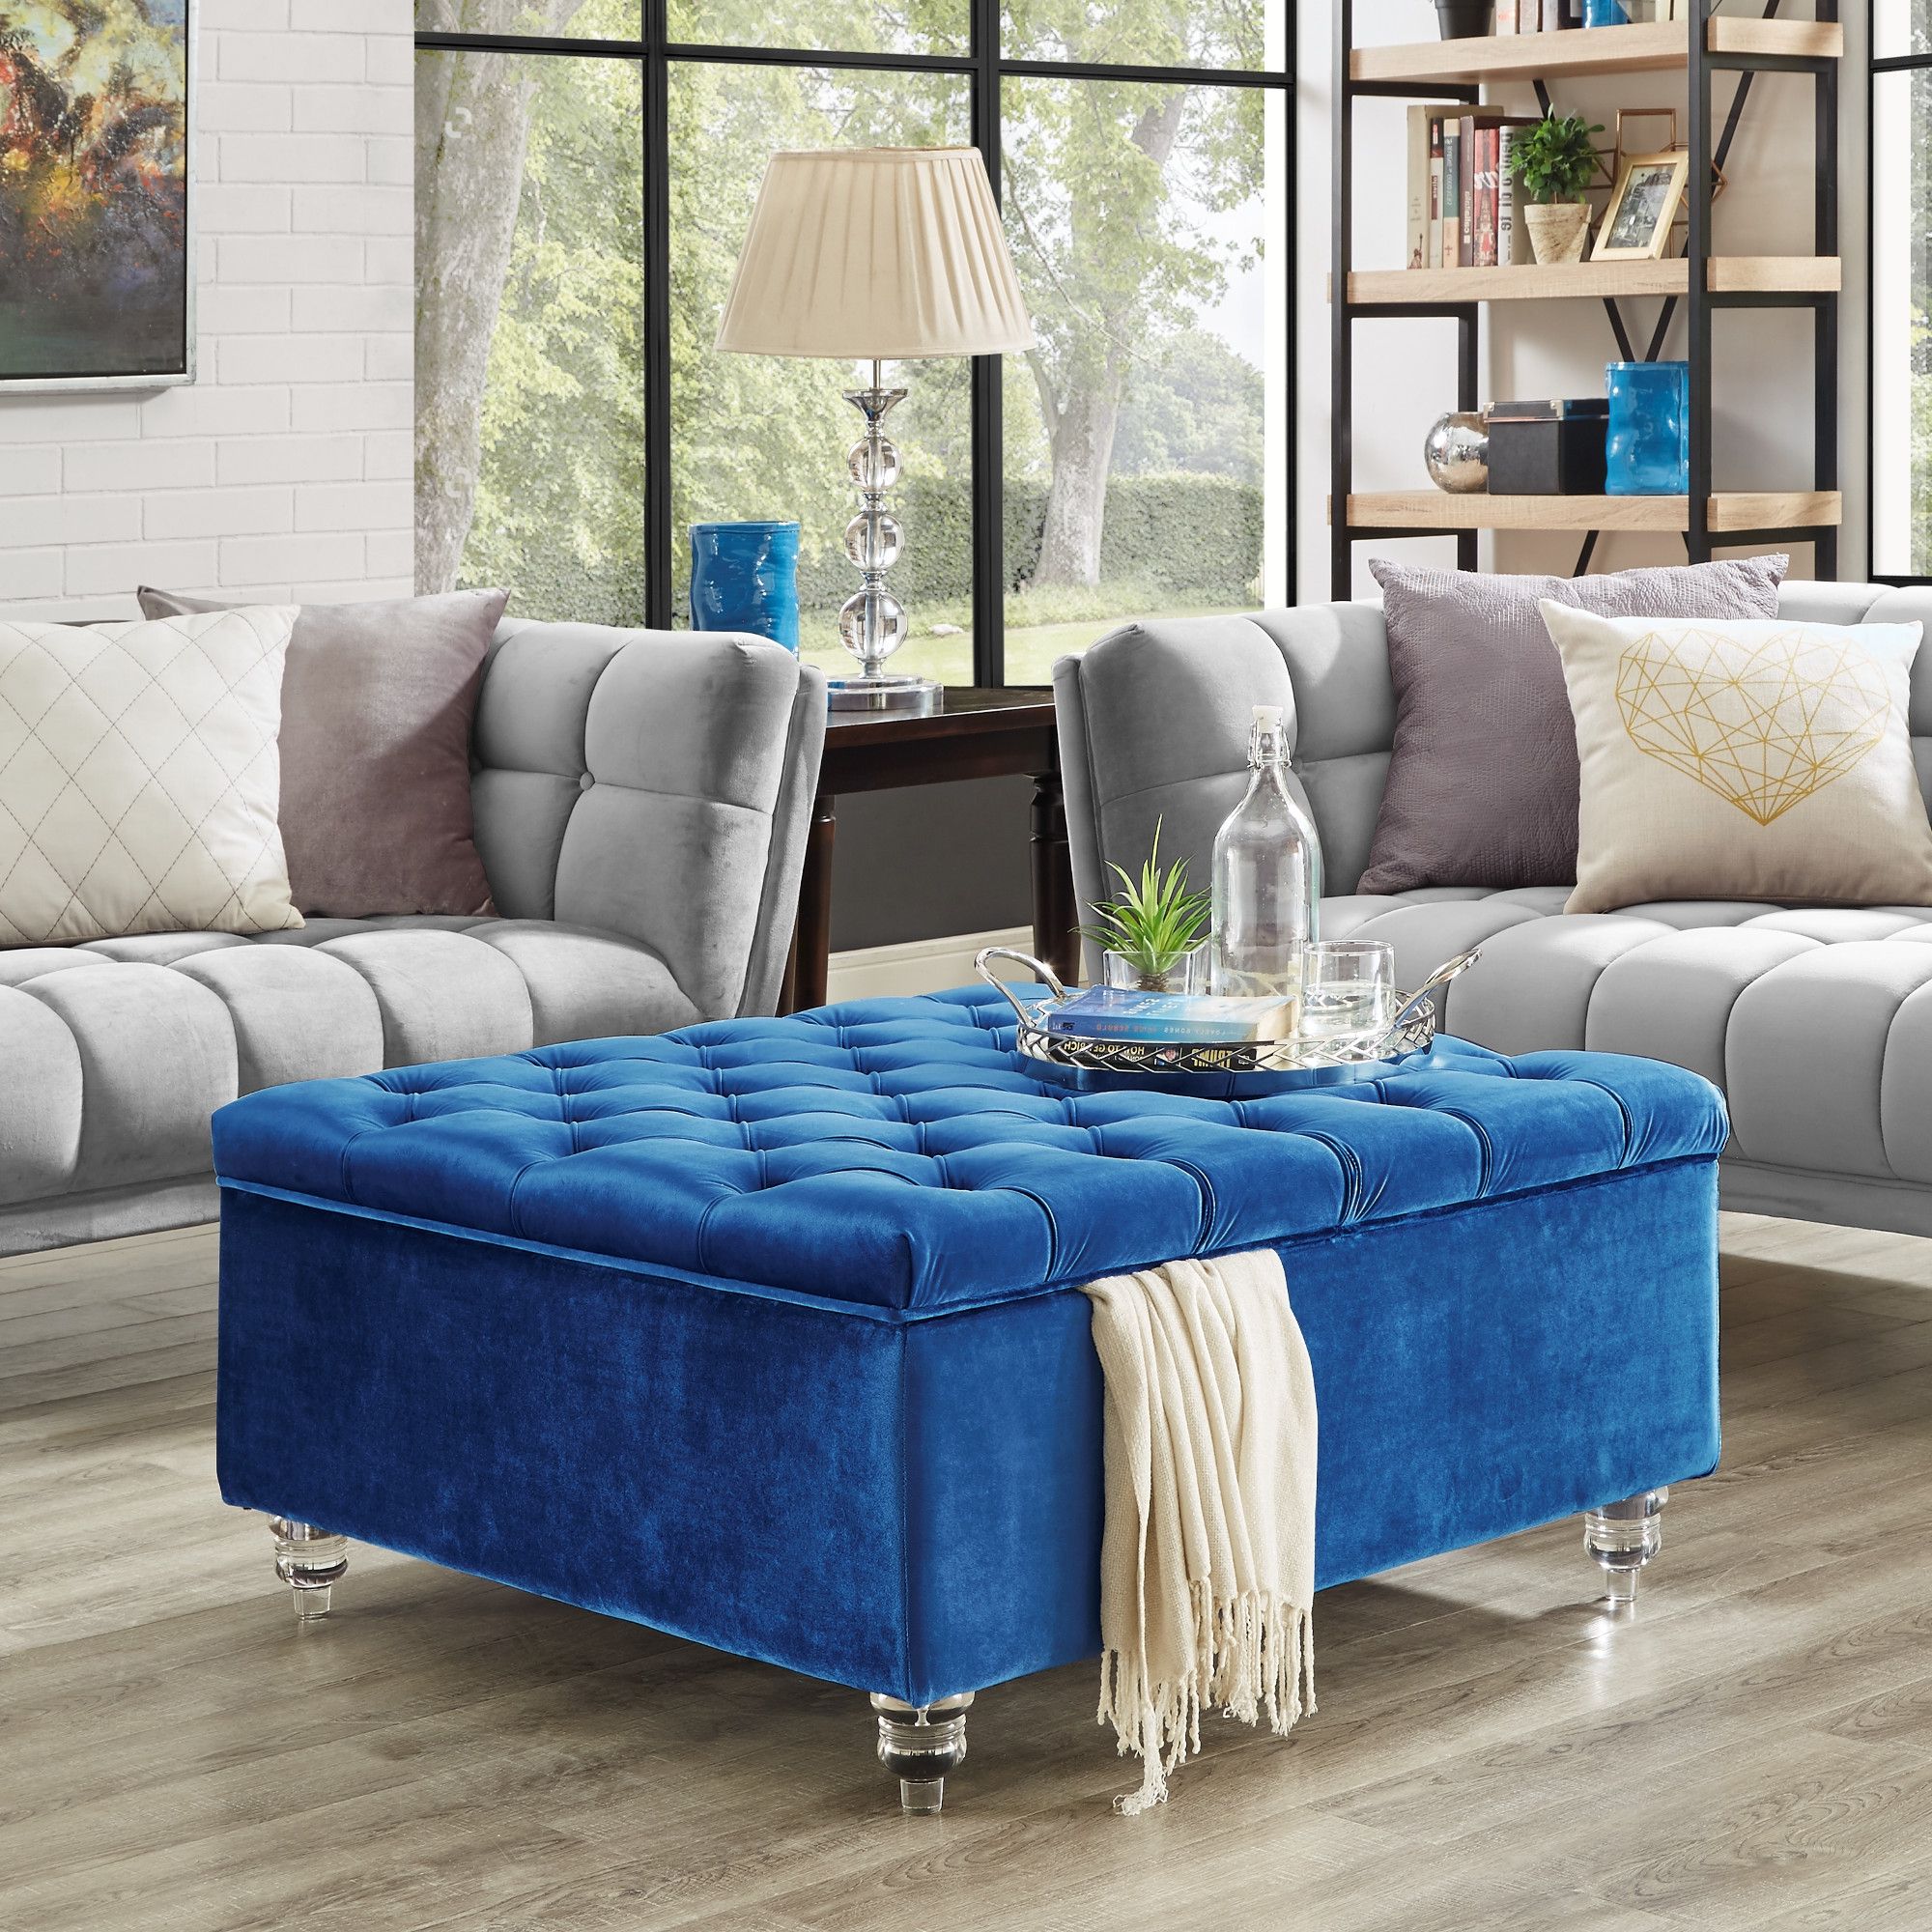 Fabric Tufted Square Cocktail Ottomans Inside Widely Used Square Ottoman Coffee Table Uk – Parisian Tufted Fabric Square Ottoman (View 6 of 10)